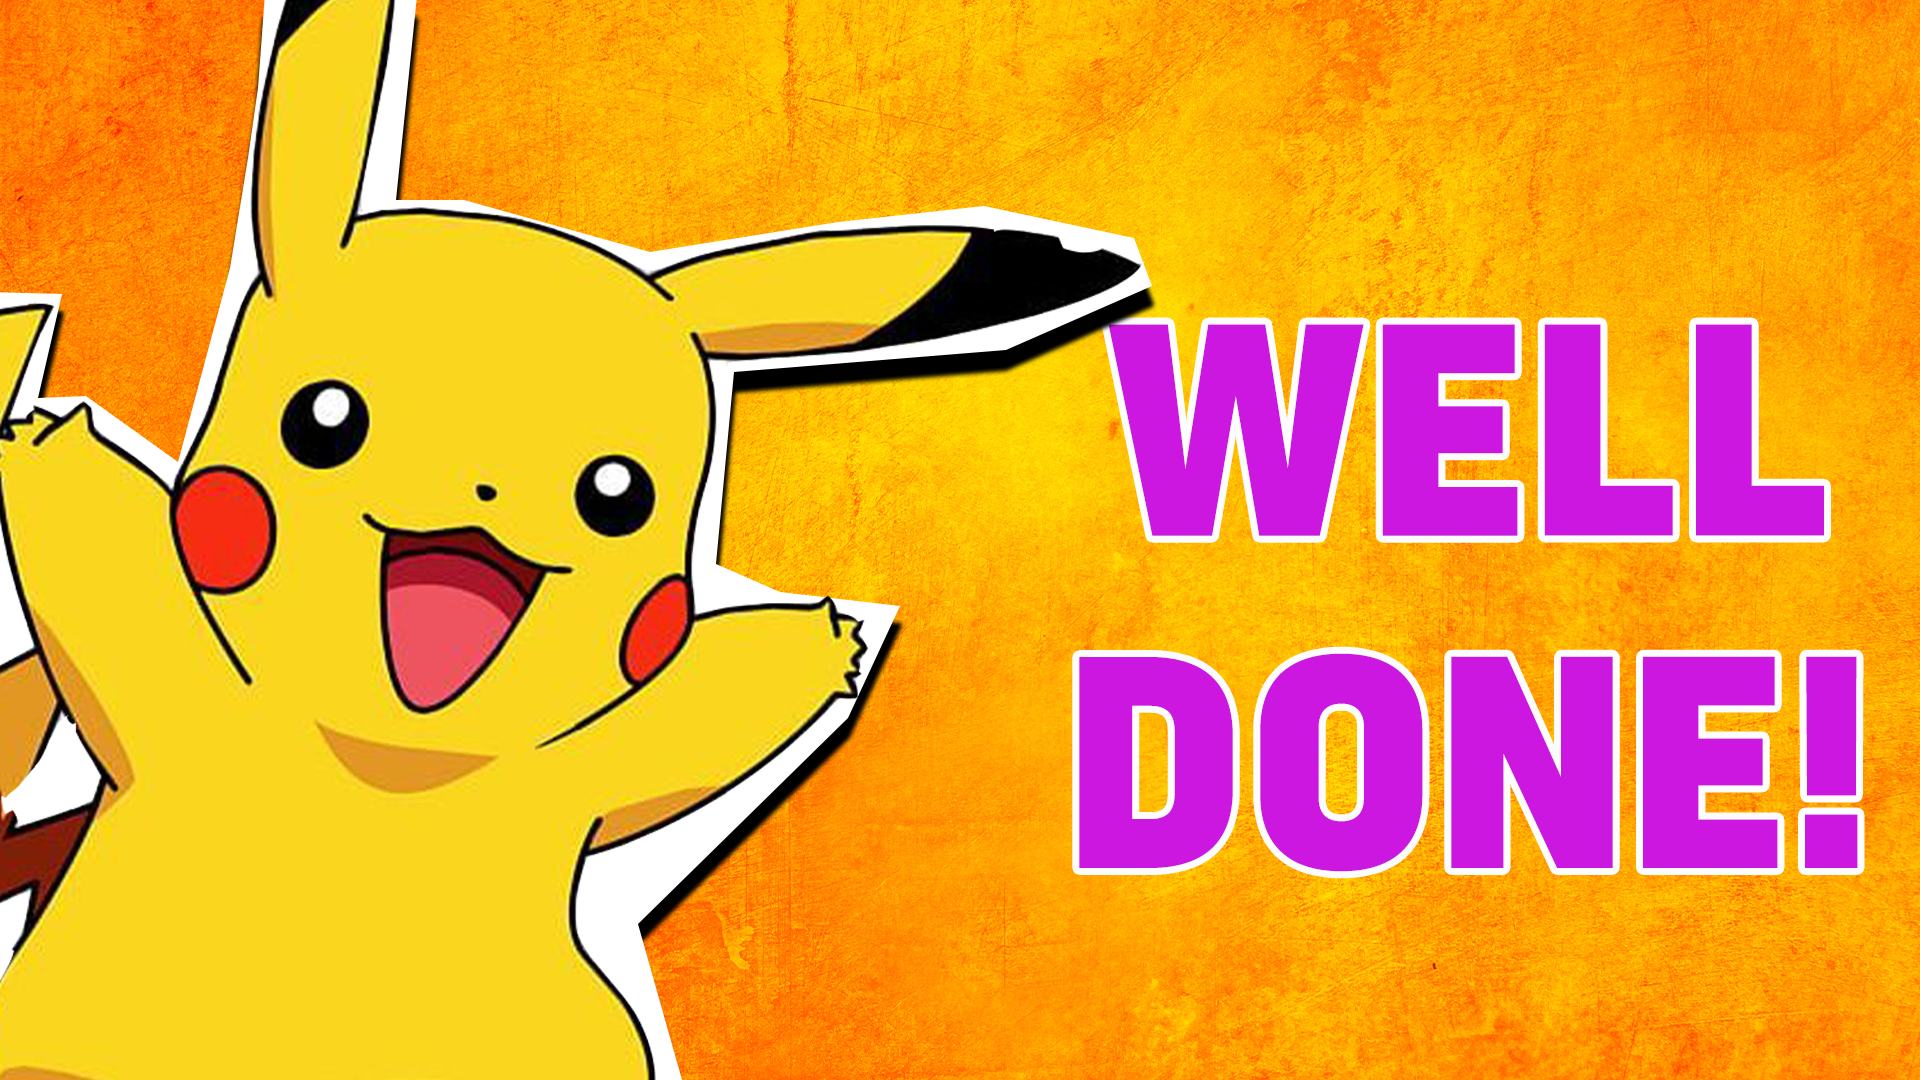 Good job! We can tell you love Pokémon and everything about it! But are you ready to get 100%?